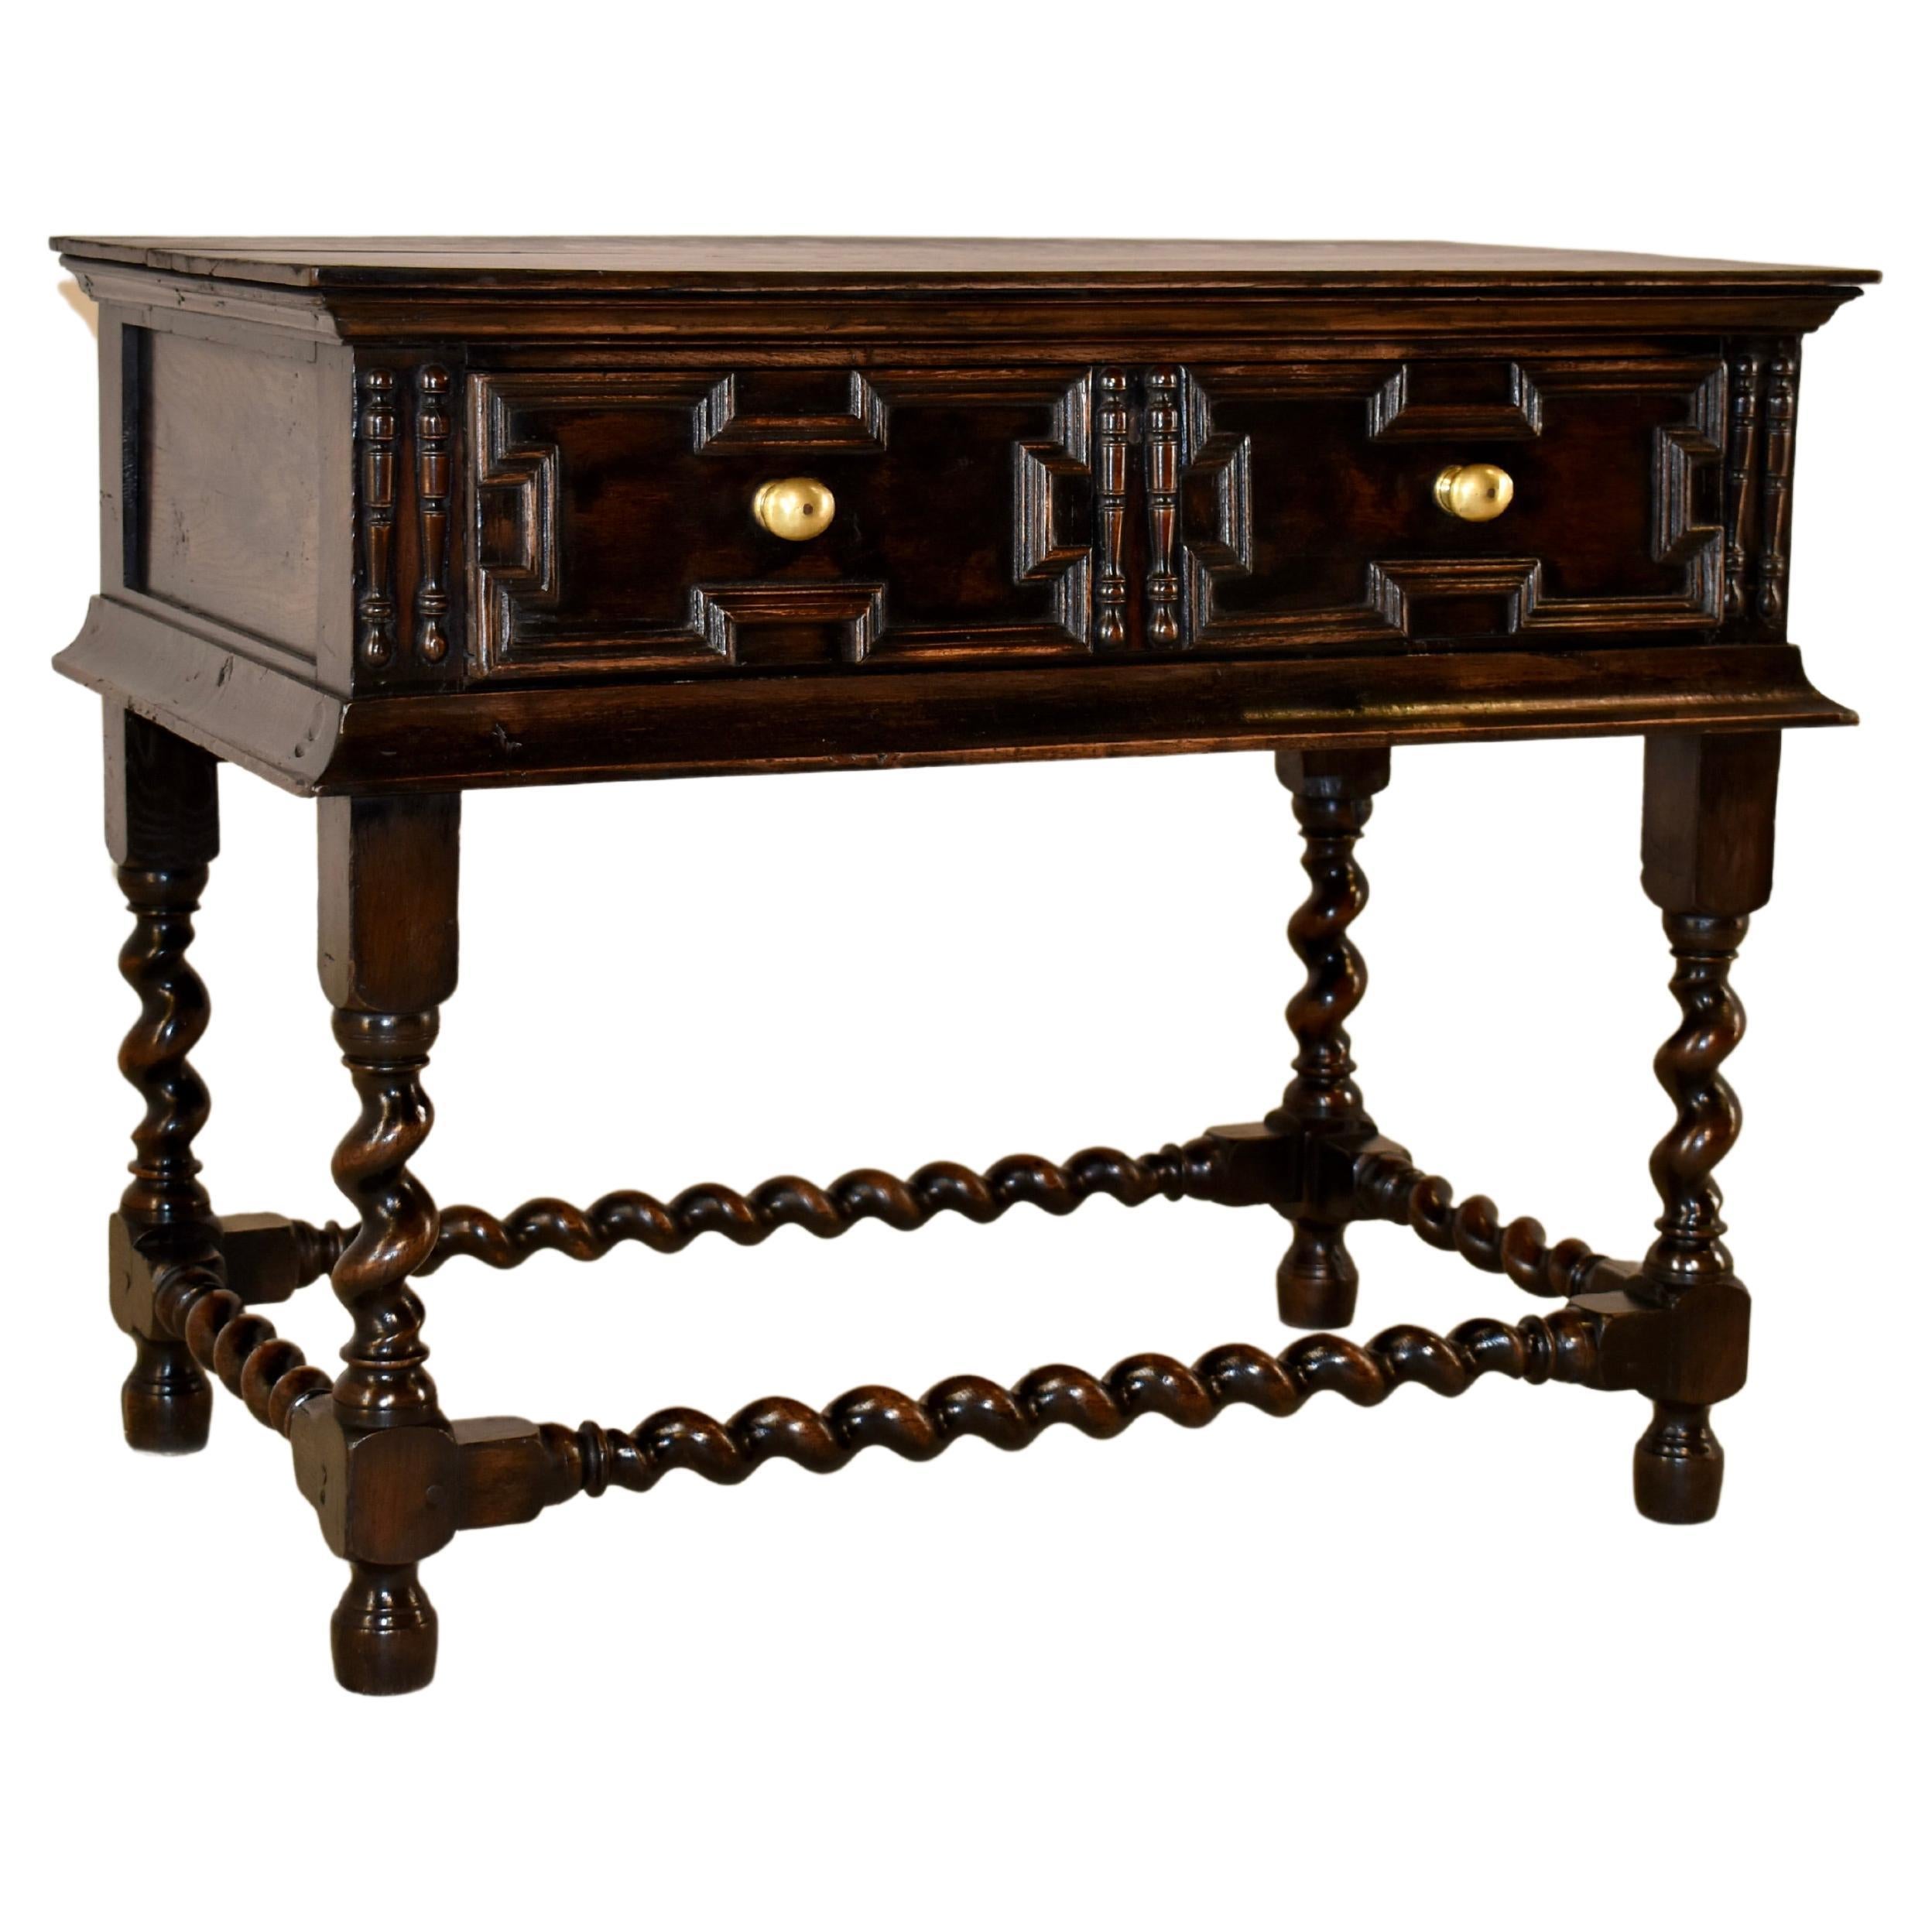 Early 18th Century English Oak Table For Sale